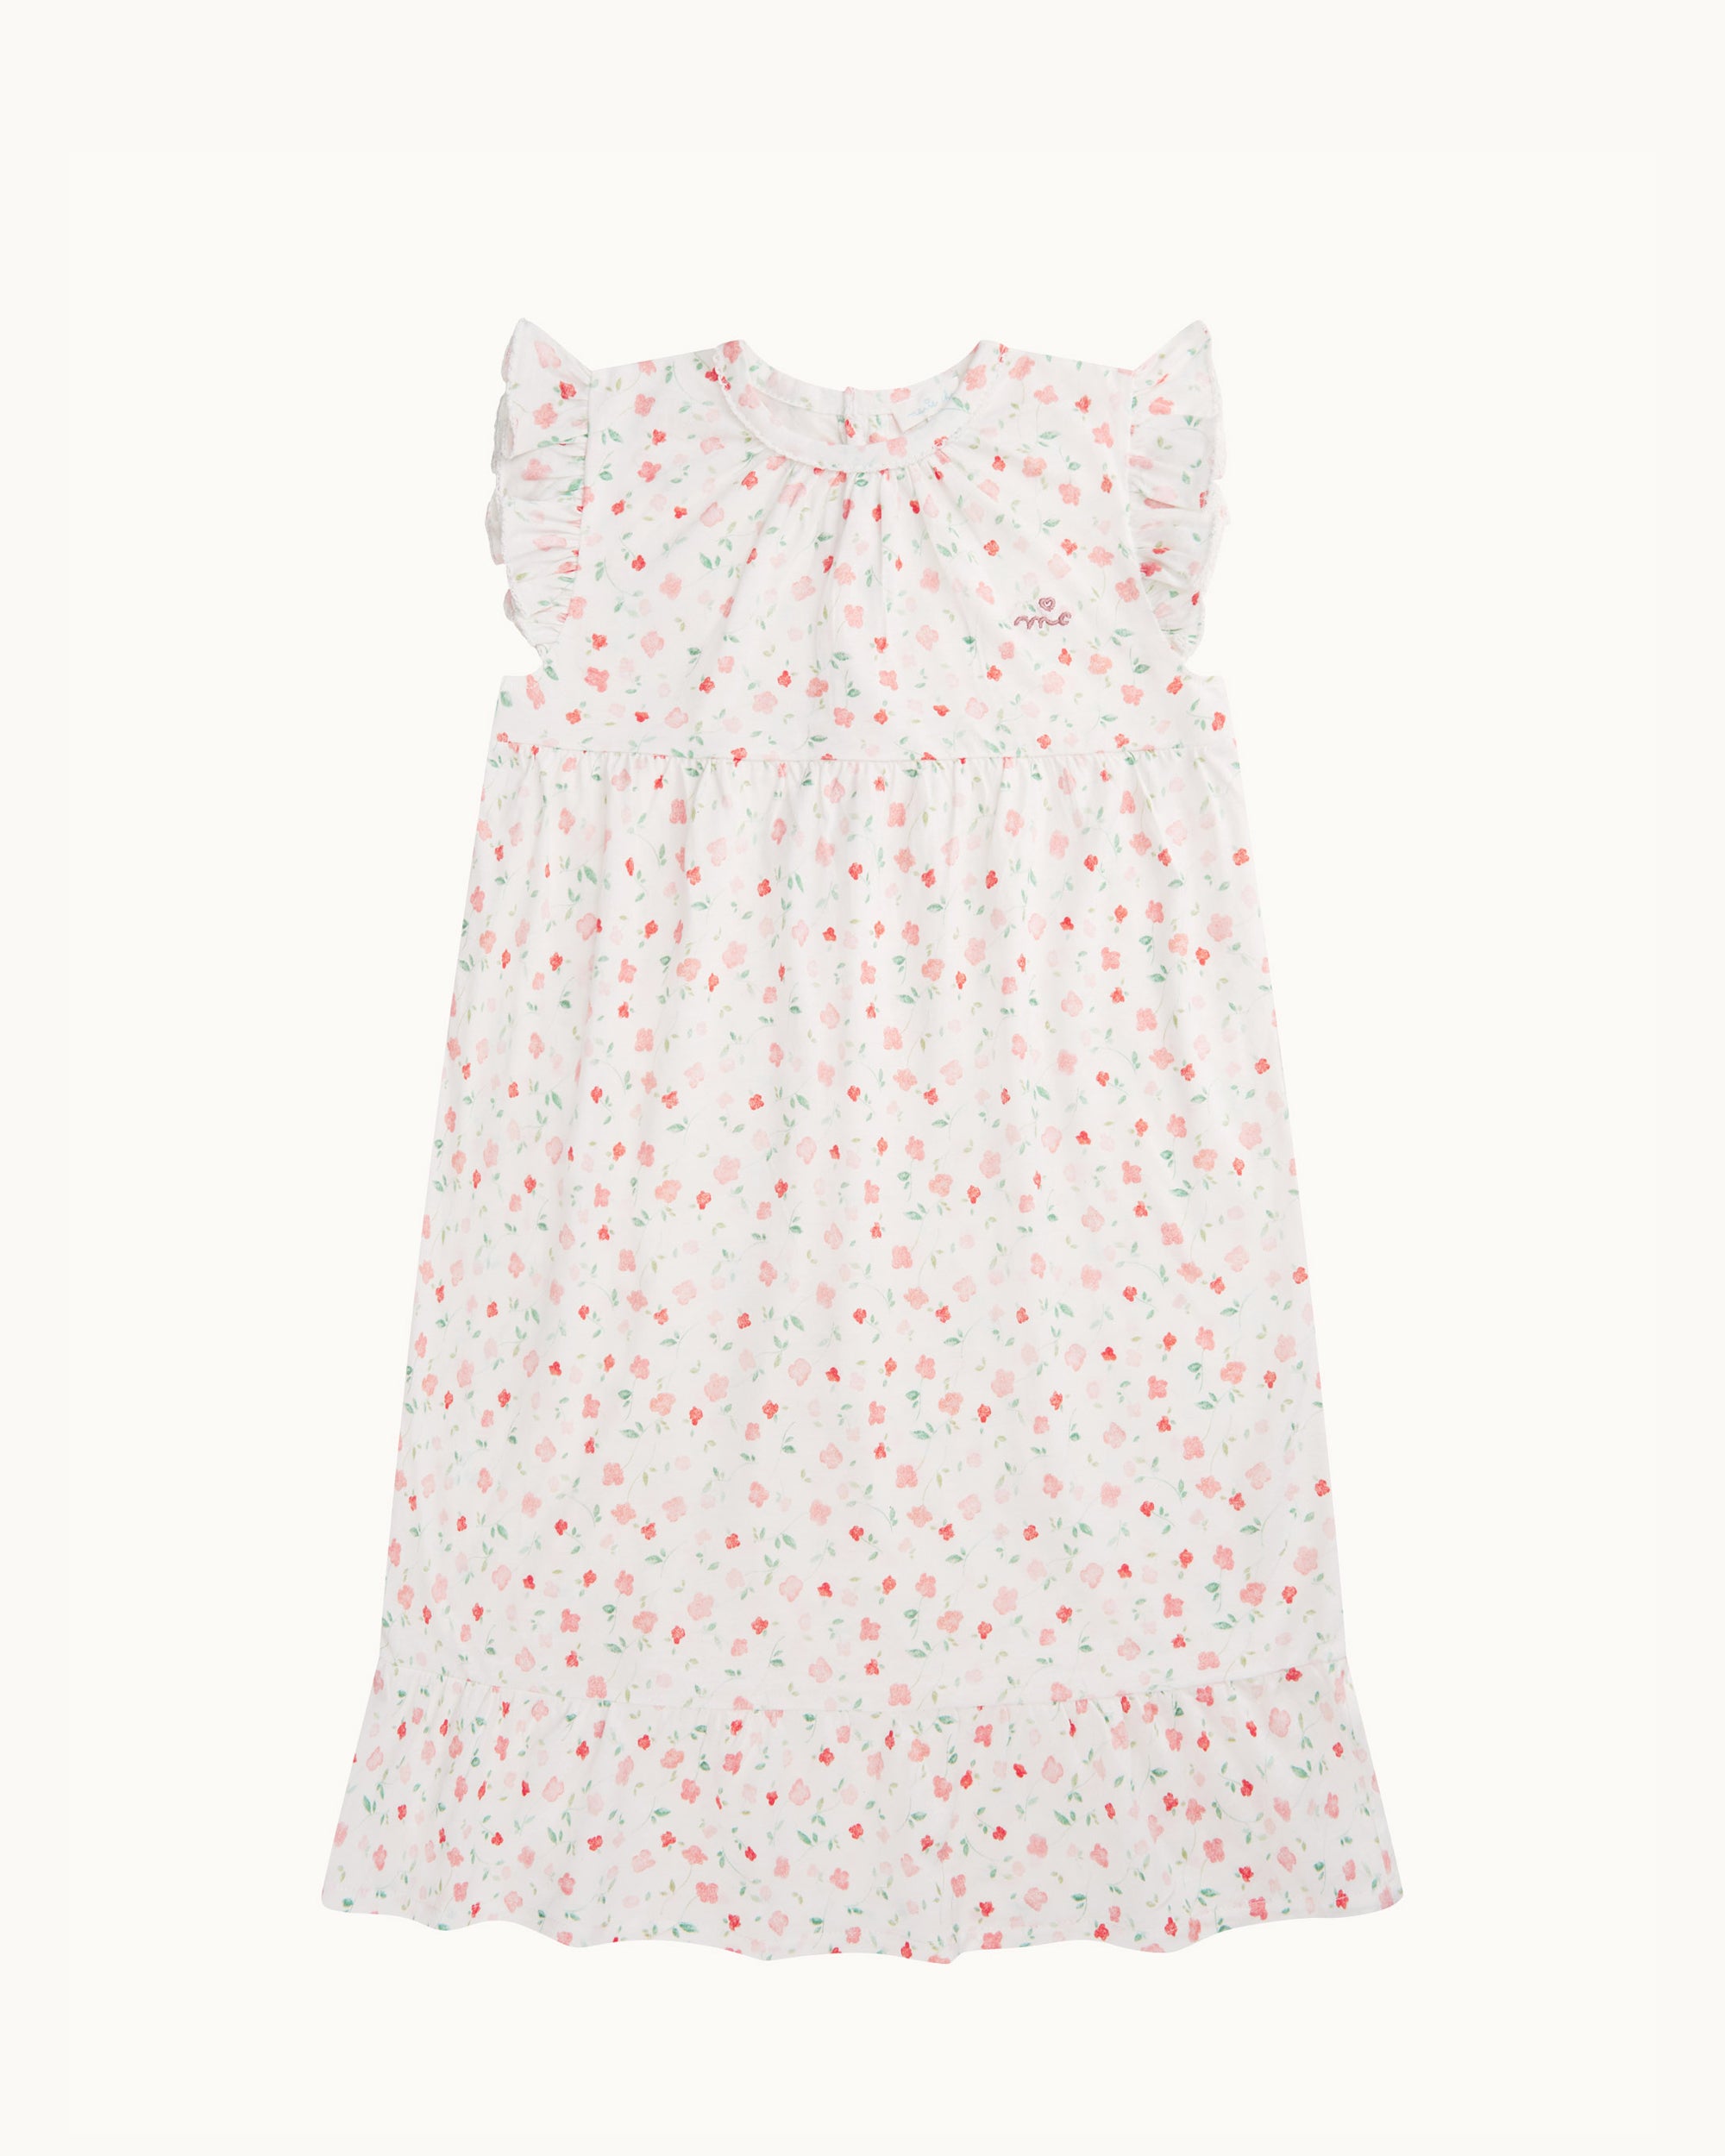 Bloom Wind Ditsy Nightgown - Child